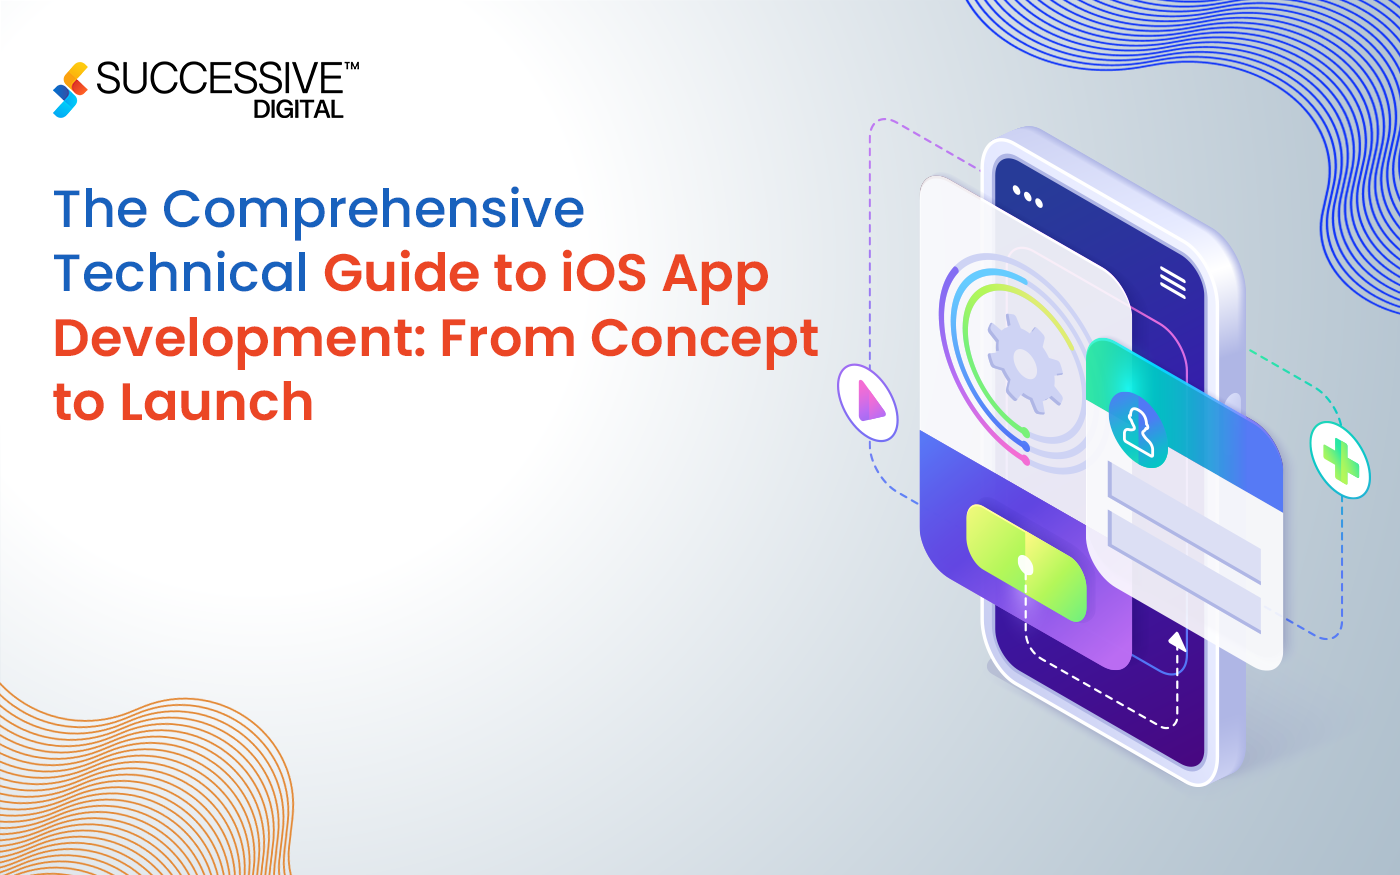 The Comprehensive Technical Guide to iOS Mobile App Development: From Concept to Launch